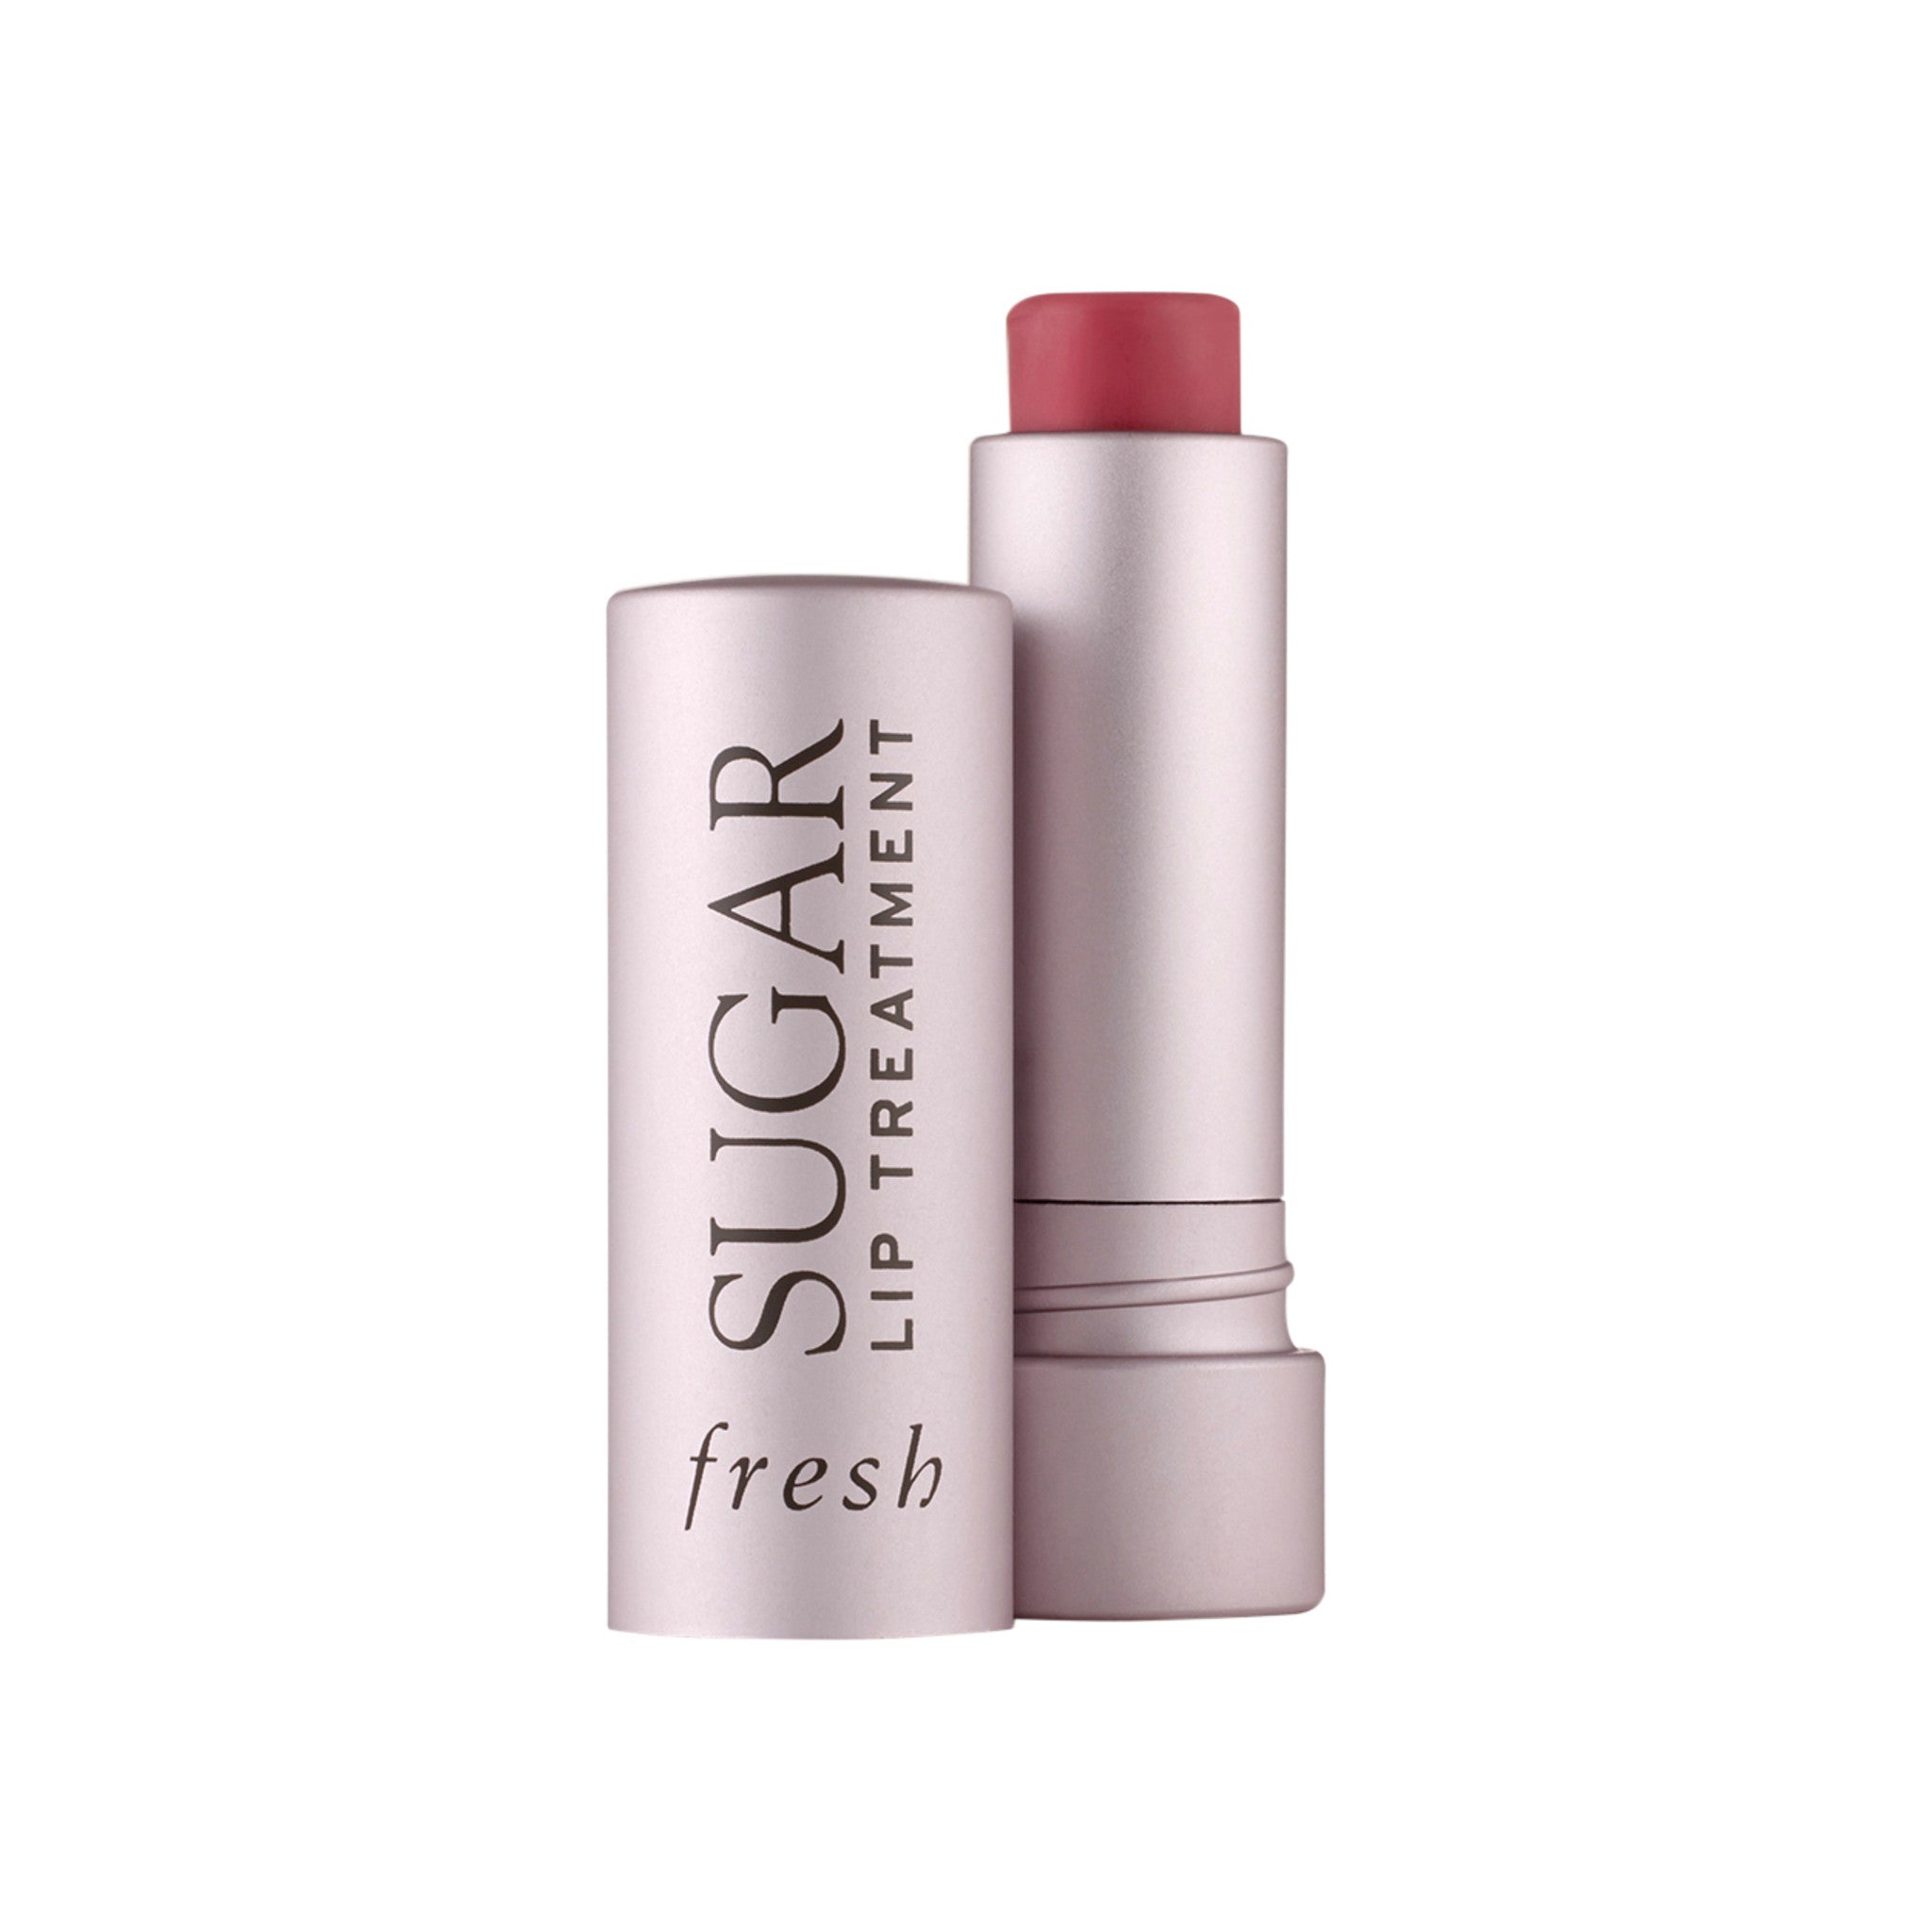 Fresh Sugar Lip Balm Color/Shade variant: Rose main image. This product is in the color pink